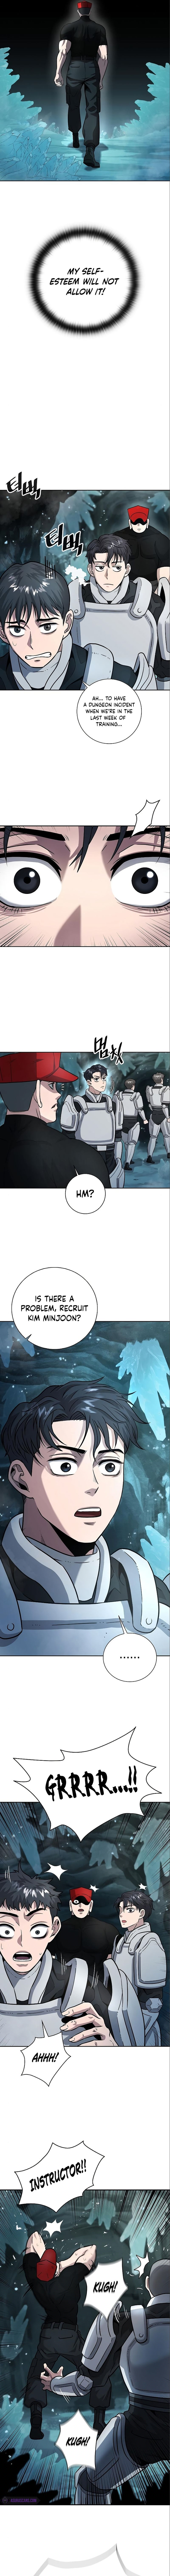 The Dark Mage’s Return to Enlistment Chapter 6 page 7